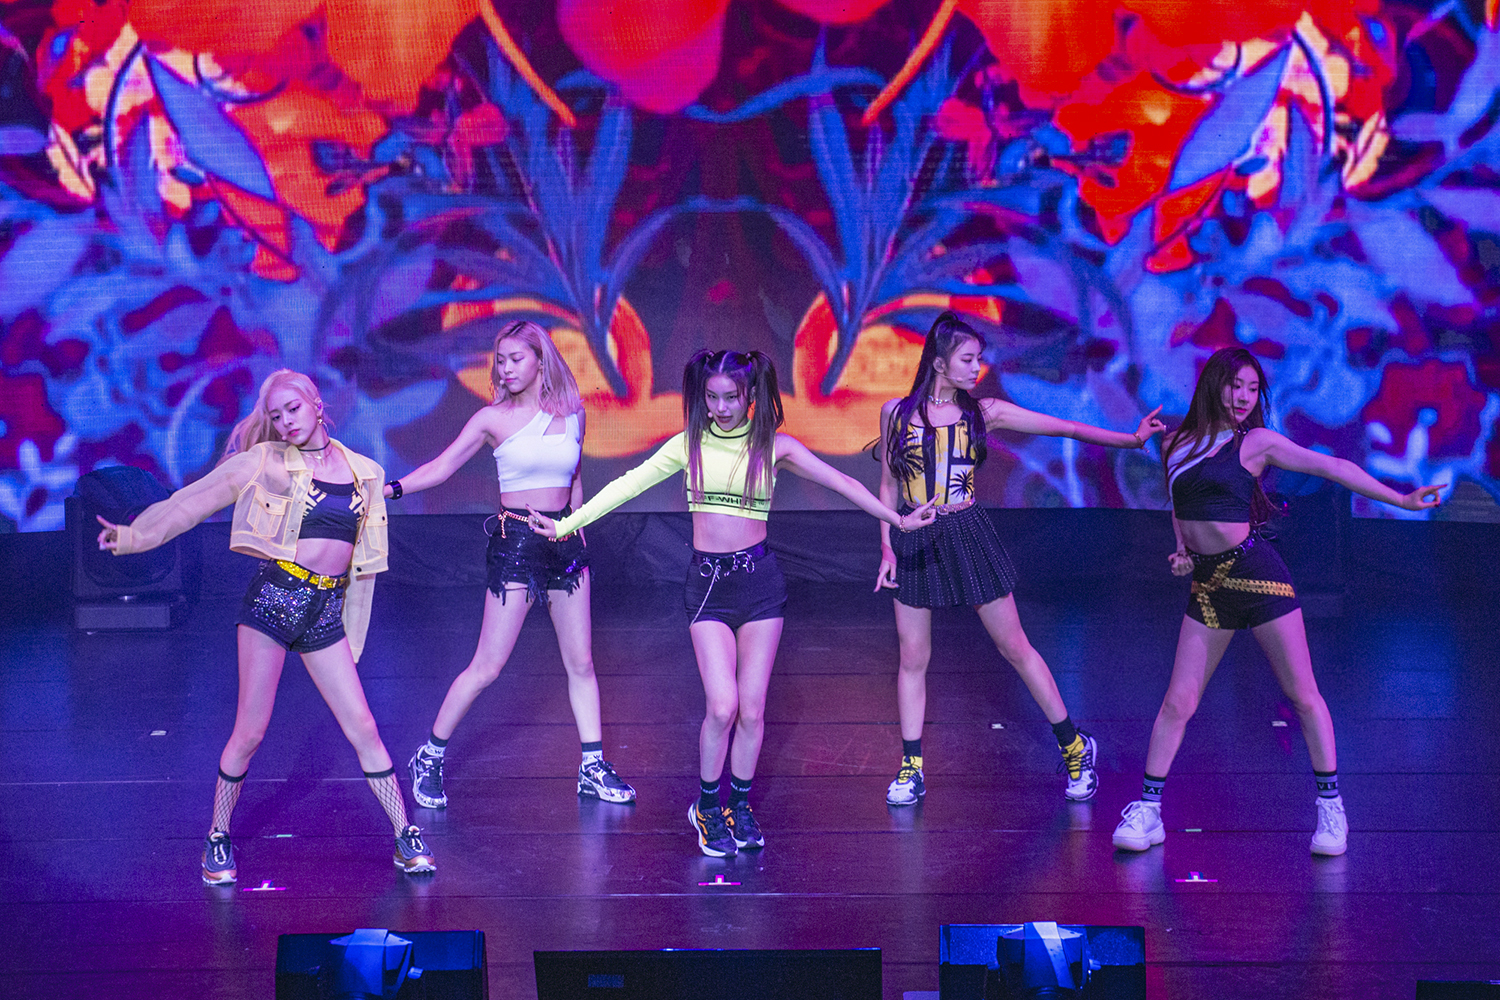 Girl group ITZY (ITZY) successfully held Taipei performance, the third venue of the first overseas showcase tour.ITZY will be on the overseas showcase tour ITZY PREMIERE SHOWCASE TOUR ITZY at the Taipei International Trade Center (TICC) at 6 pm on the 1st (local time).ITZY! (ITZY Premier Showcase Tour ITZY? ITZY!) The performance sold out just on the day it started its first booking.On this day, ITZY showed energy-filled performances on every stage, including its debut song Dallala and the title song ICY of the mini 1st album ITz ICY (ITZY IC).ITZYs overseas showcase tour opened on November 2 in Jakarta and continued to open in Macau on the 9th.It will enter Asia on February 8, Manila, Singapore on March 13, Bangkok on January 21, Los Angeles on January 17, Minneapolis on January 19, Houston on February 22, Washington on July 24, and the Americas on New York on January 26.